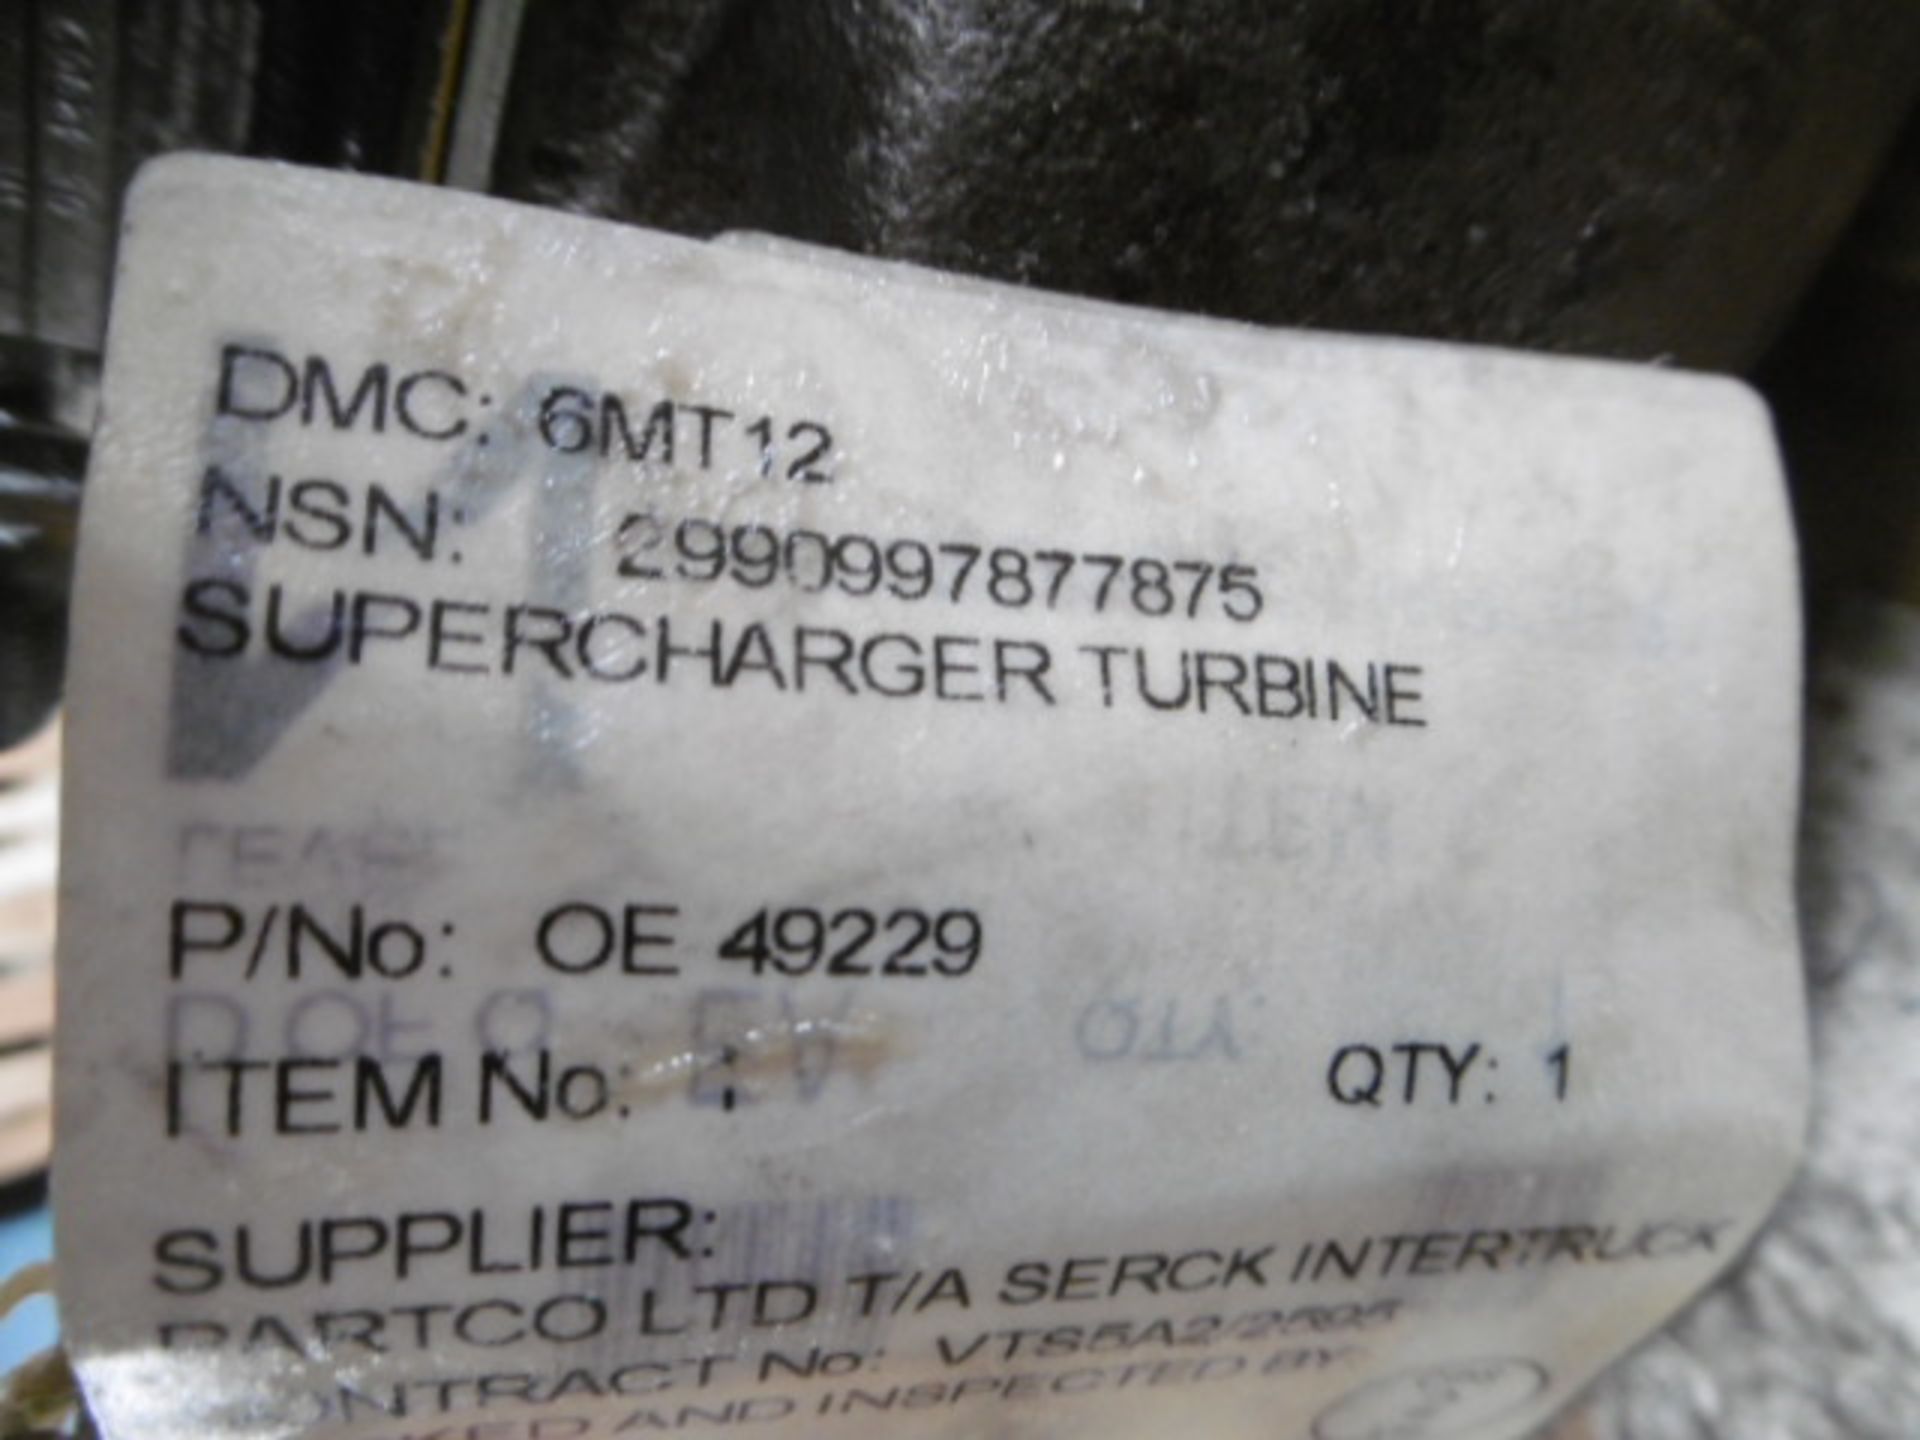 4 x DAF Turbo Chargers P/No OE49220 - Image 7 of 7